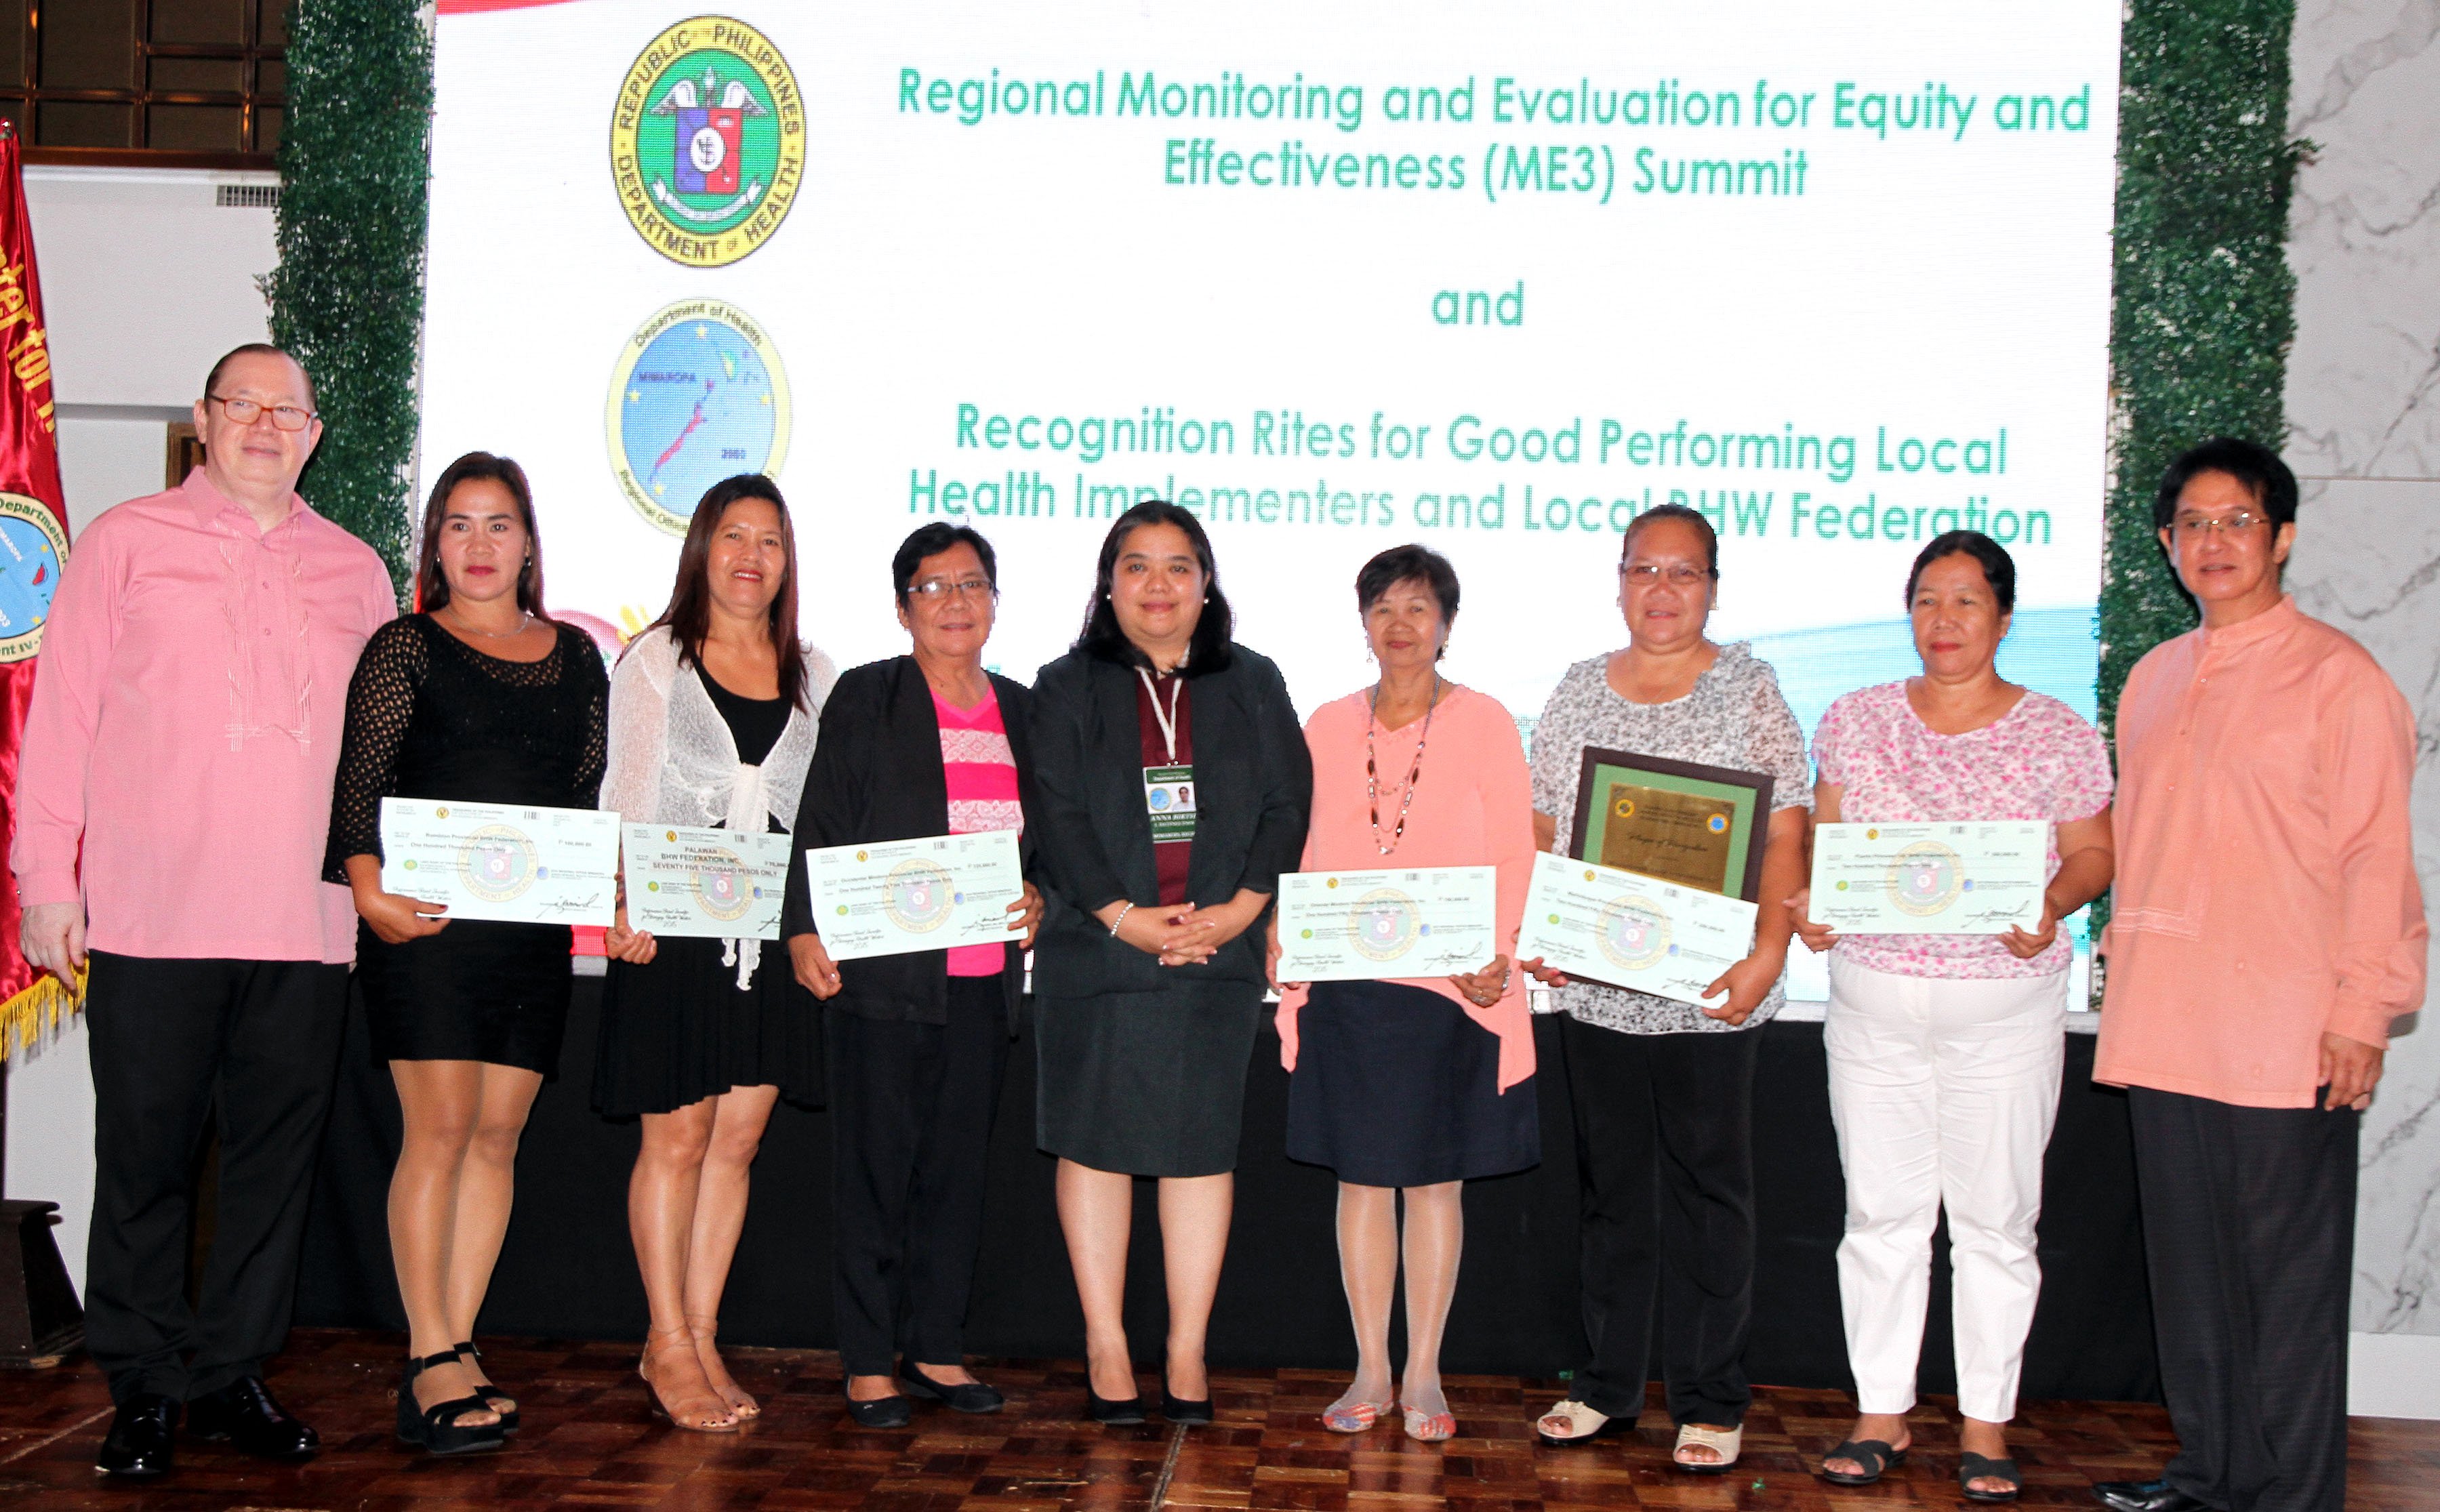 DOH-MIMAROPA awards best performing Barangay Health Workers' federations